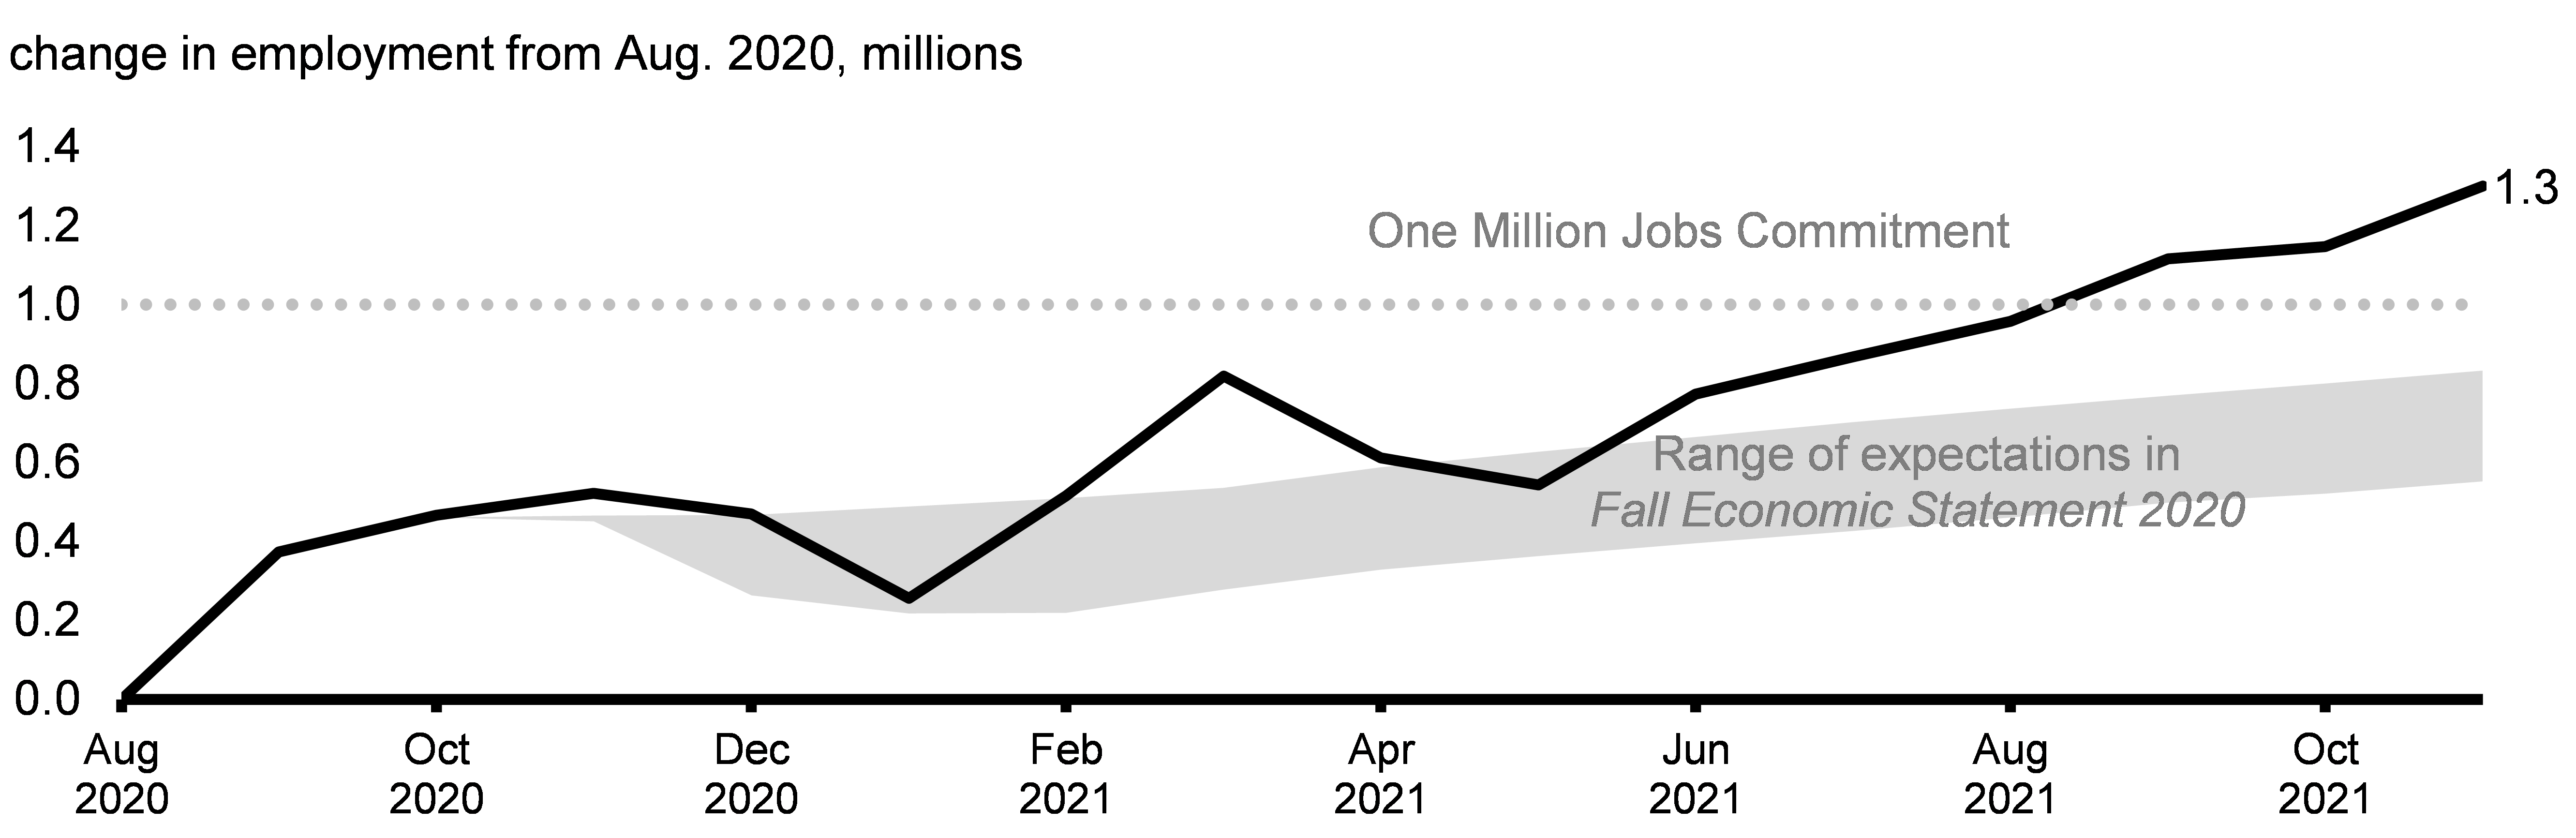 Chart 1.2: Path to One Million Jobs